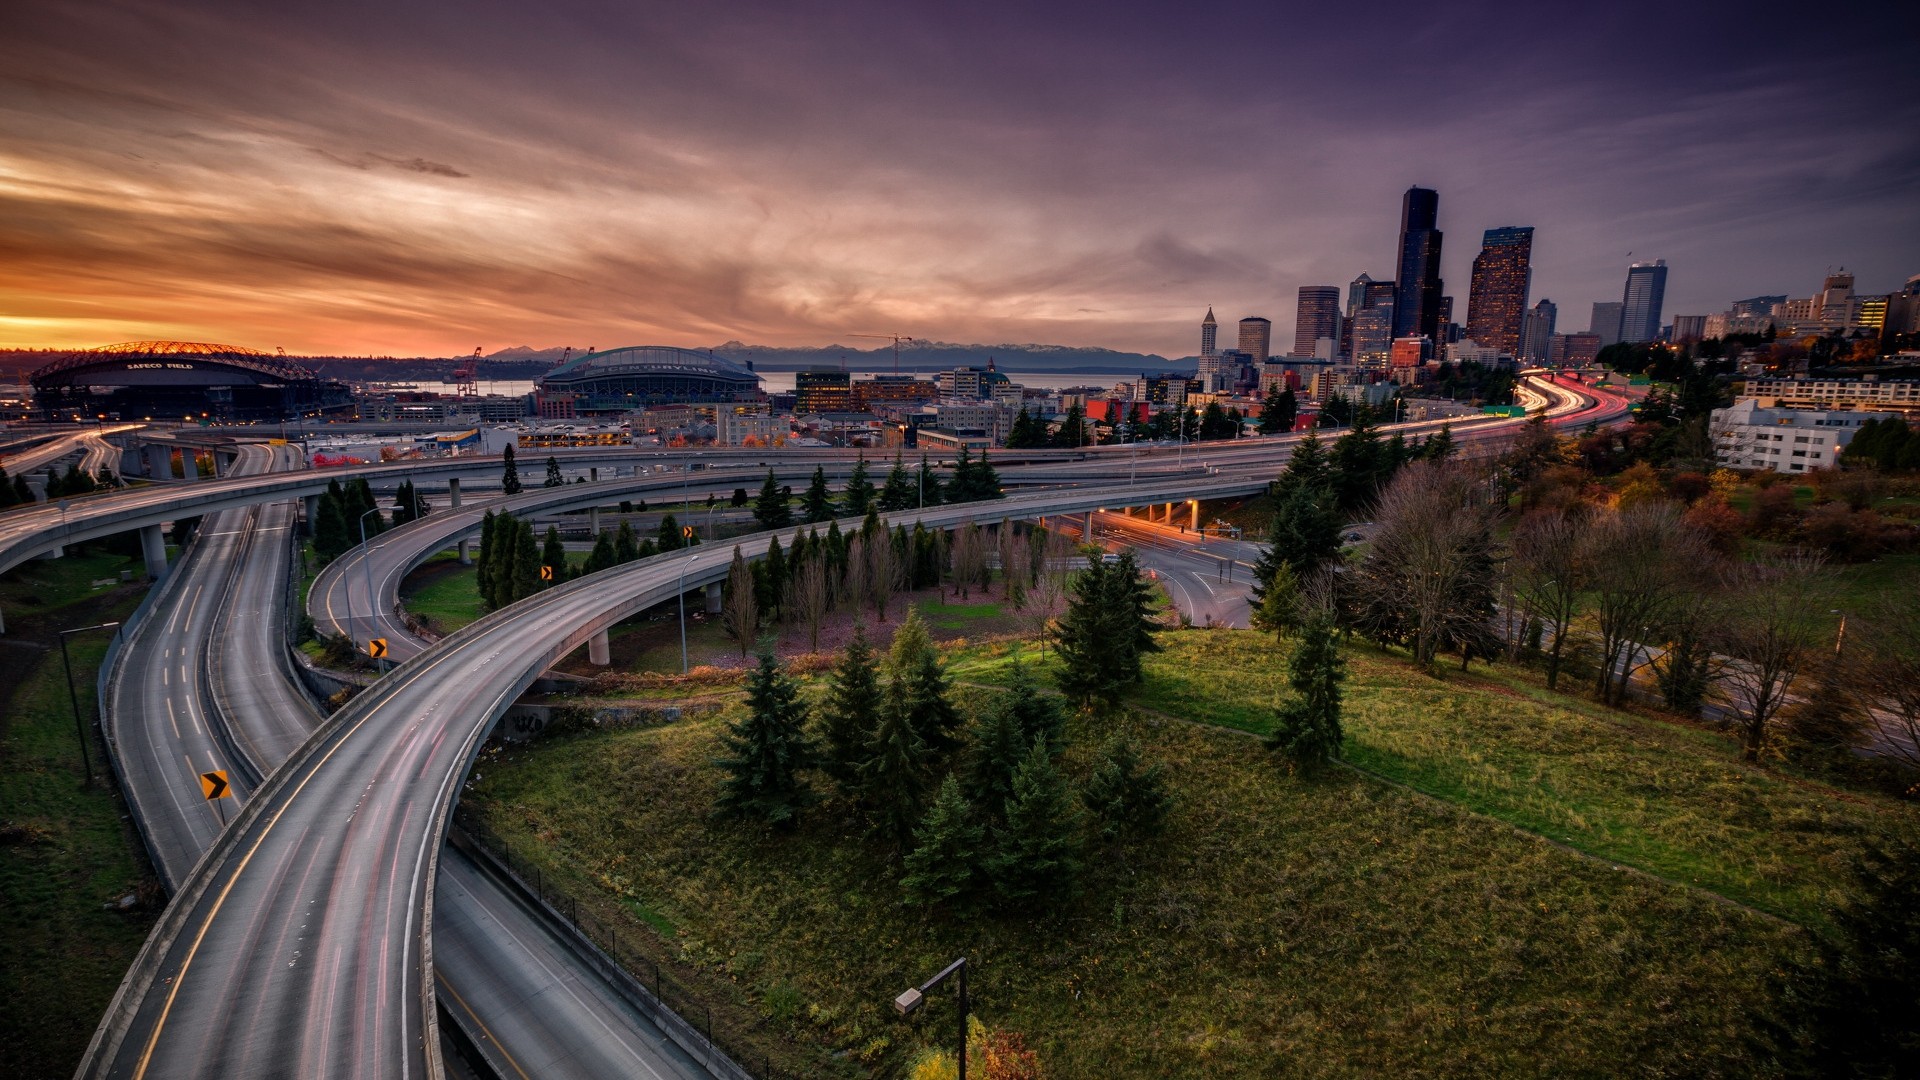 General 1920x1080 cityscape architecture road building skyscraper clouds highway trees evening sunset grass street light trails long exposure cranes (machine) stadium Seattle USA interchange overpass Washington State intersections